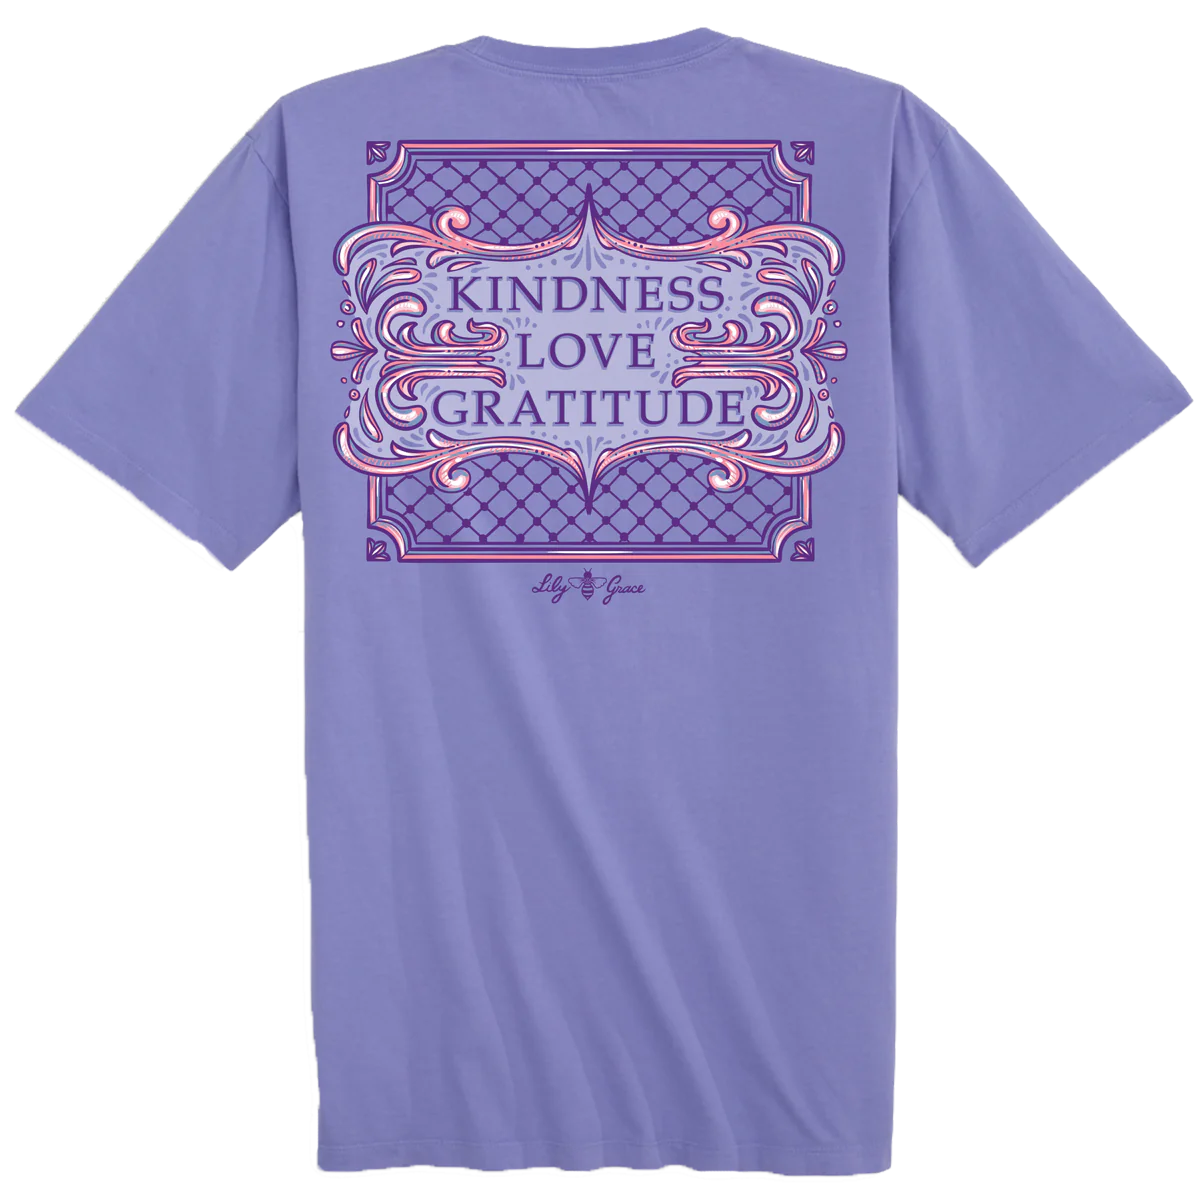 Lily Grace "kindness love ” tshirt